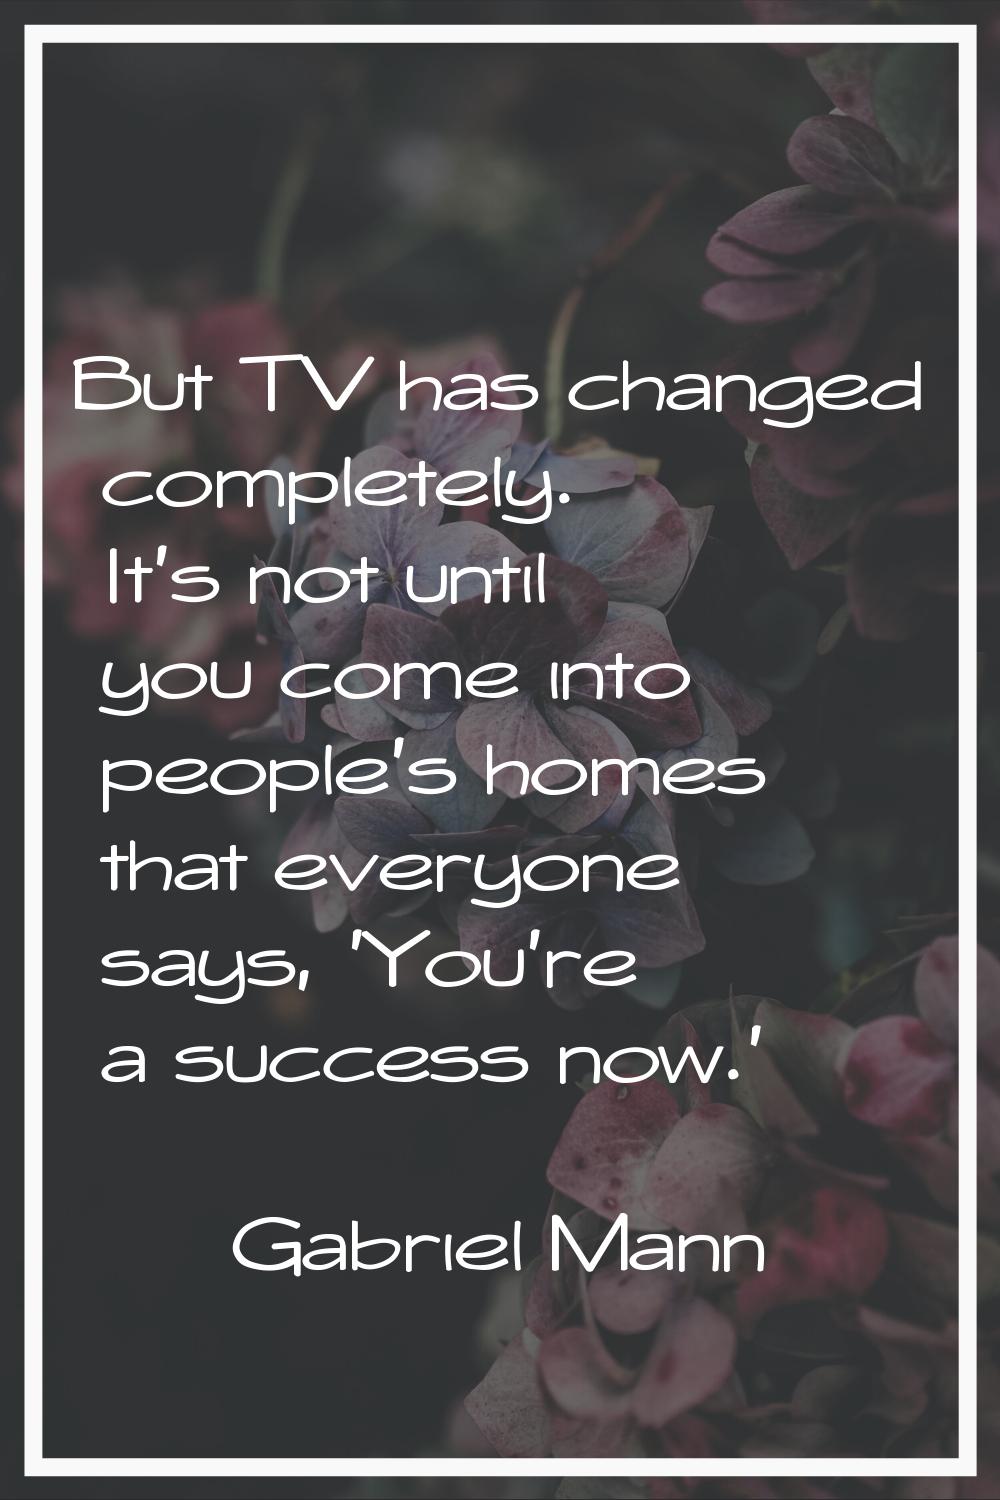 But TV has changed completely. It's not until you come into people's homes that everyone says, 'You